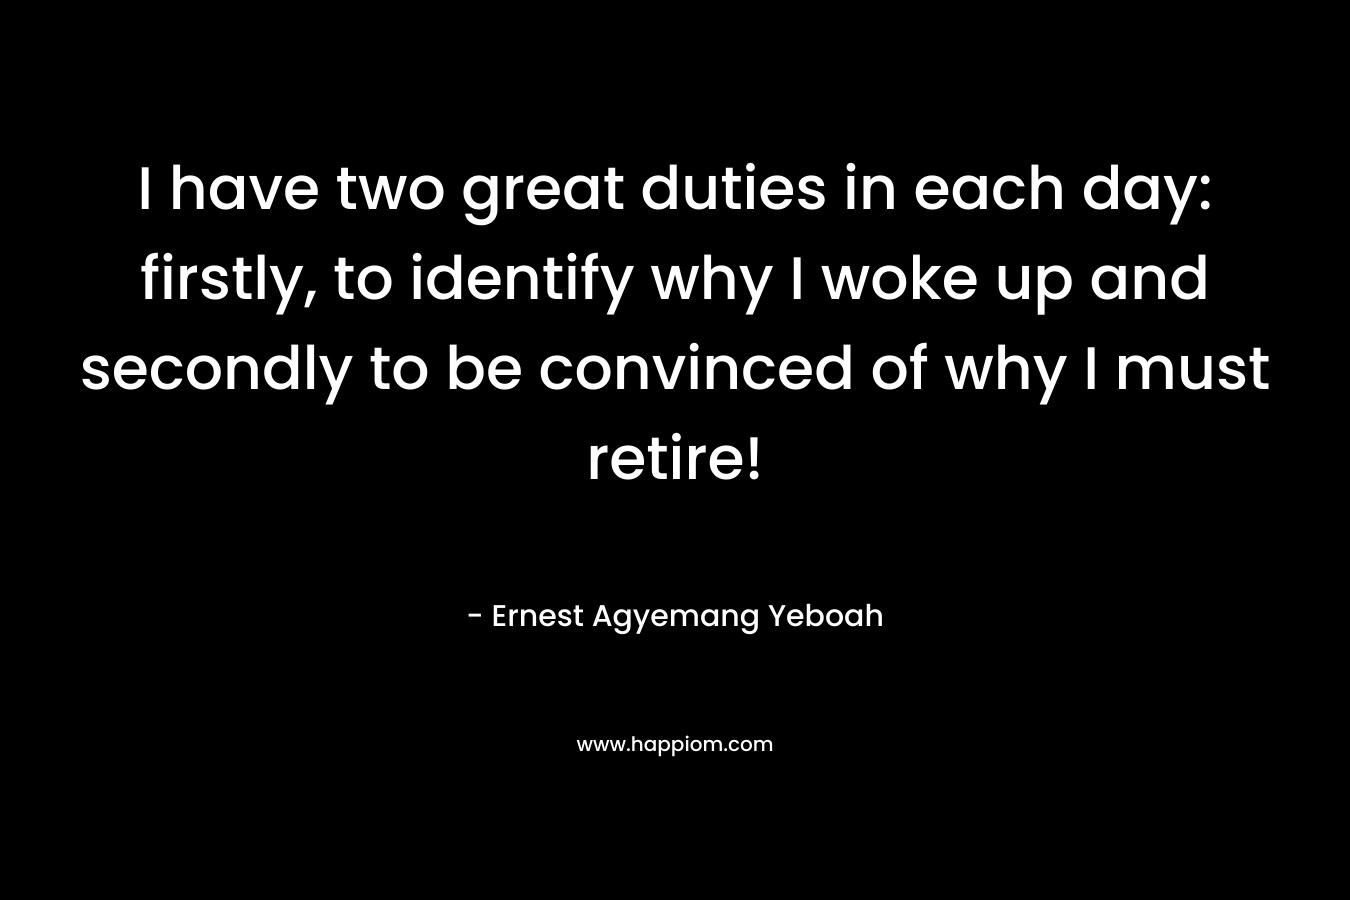 I have two great duties in each day: firstly, to identify why I woke up and secondly to be convinced of why I must retire!